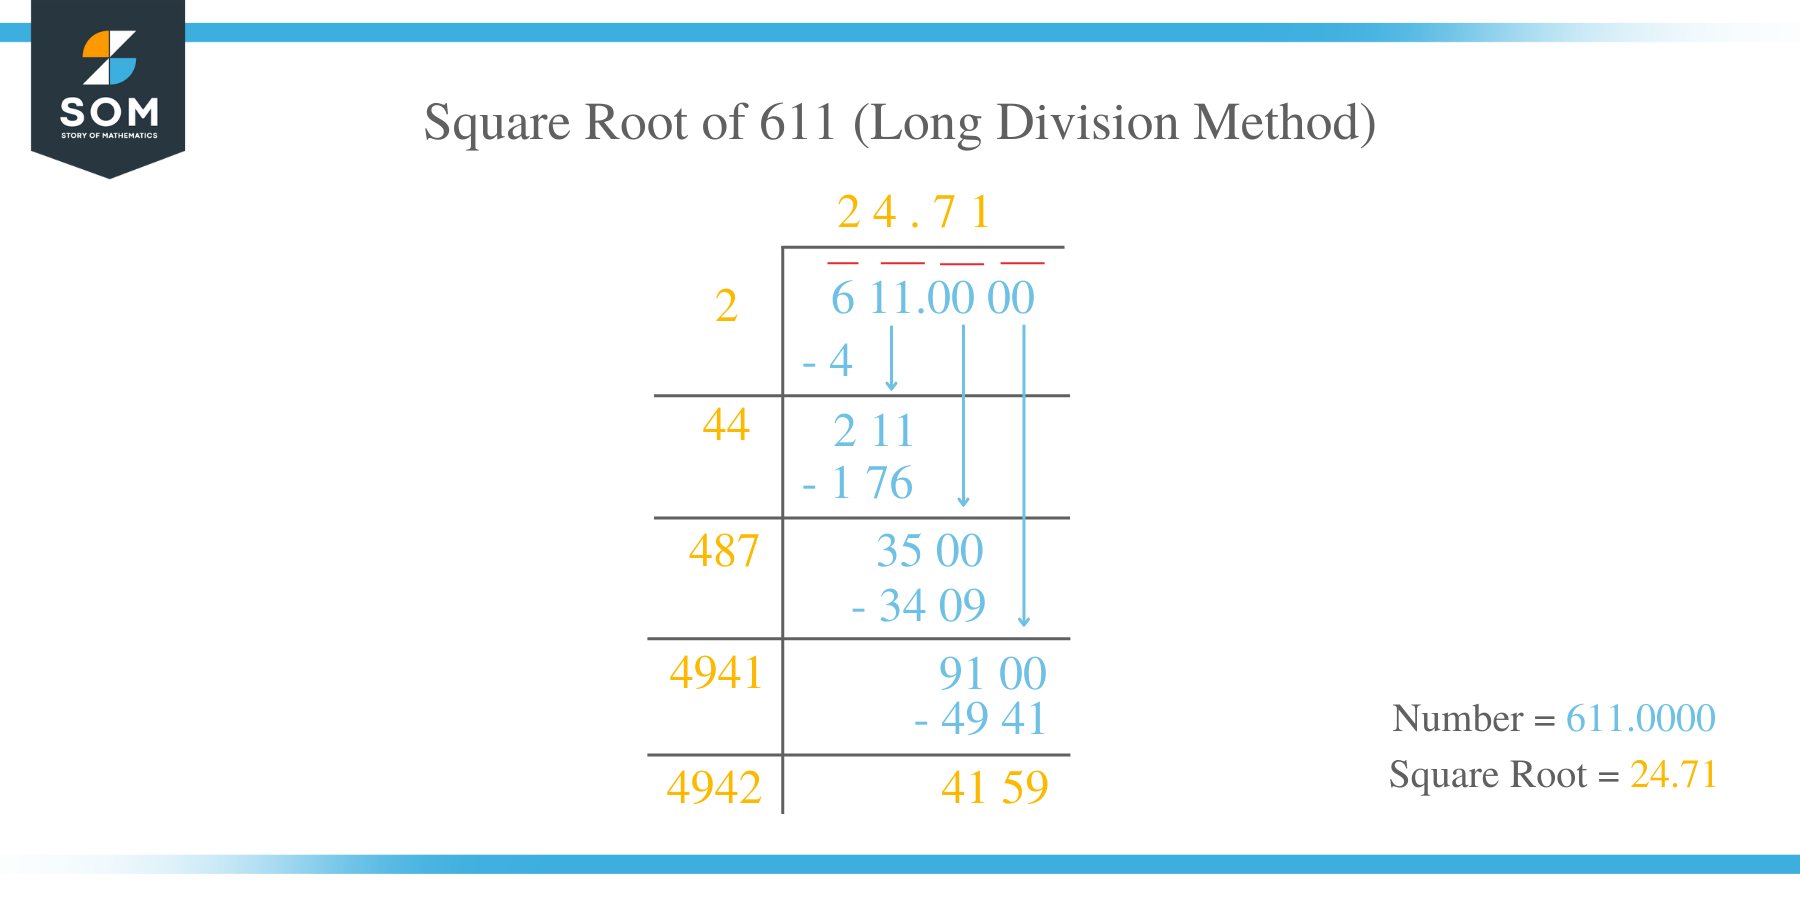 Square Root of 611 by Long Division Method